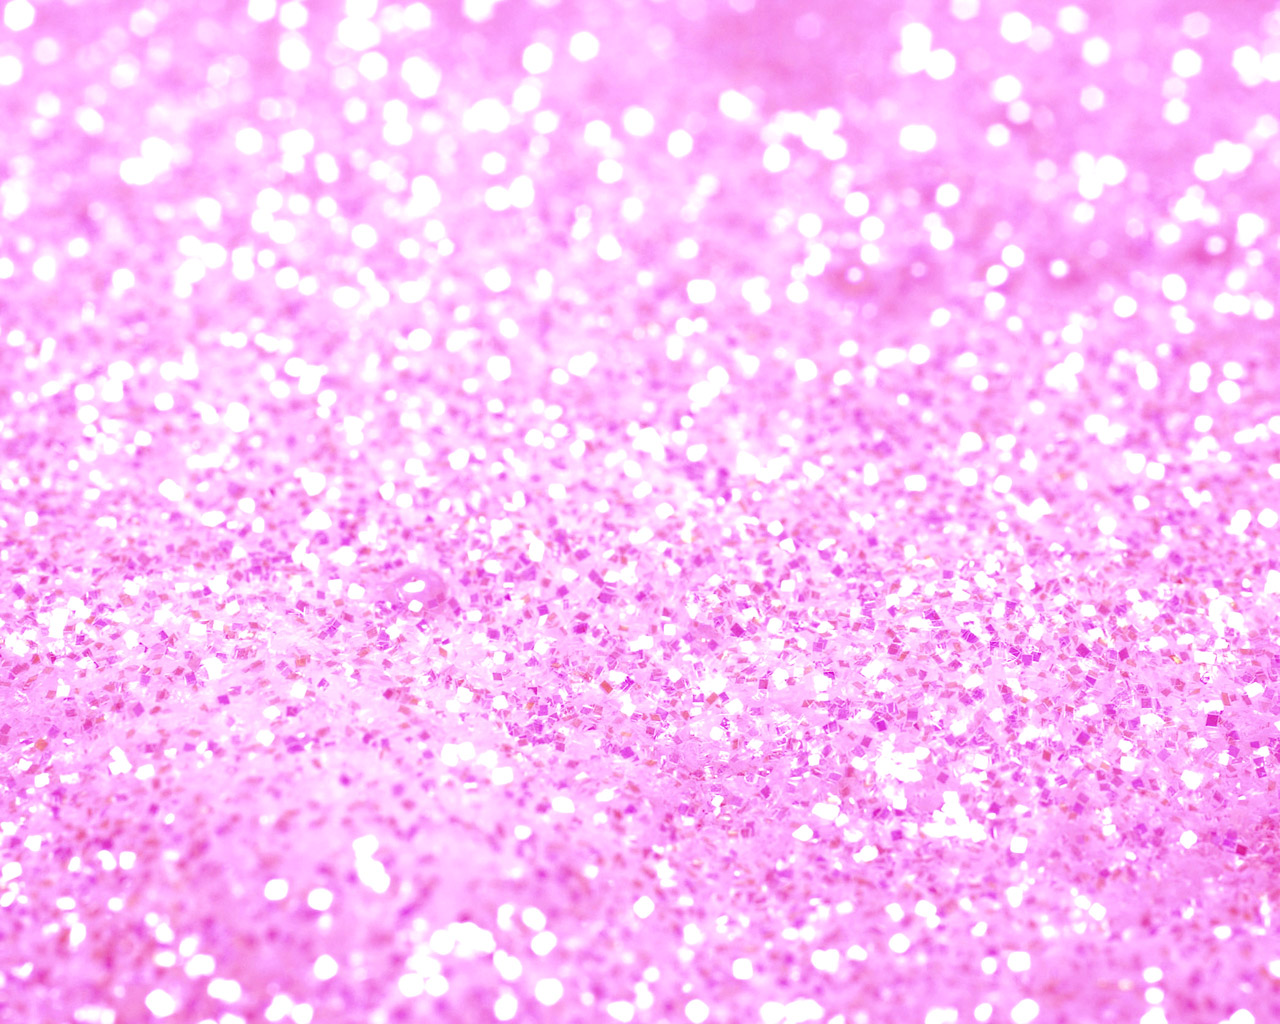 Sparkly Wallpaper Amazing HDq Cover Pictures